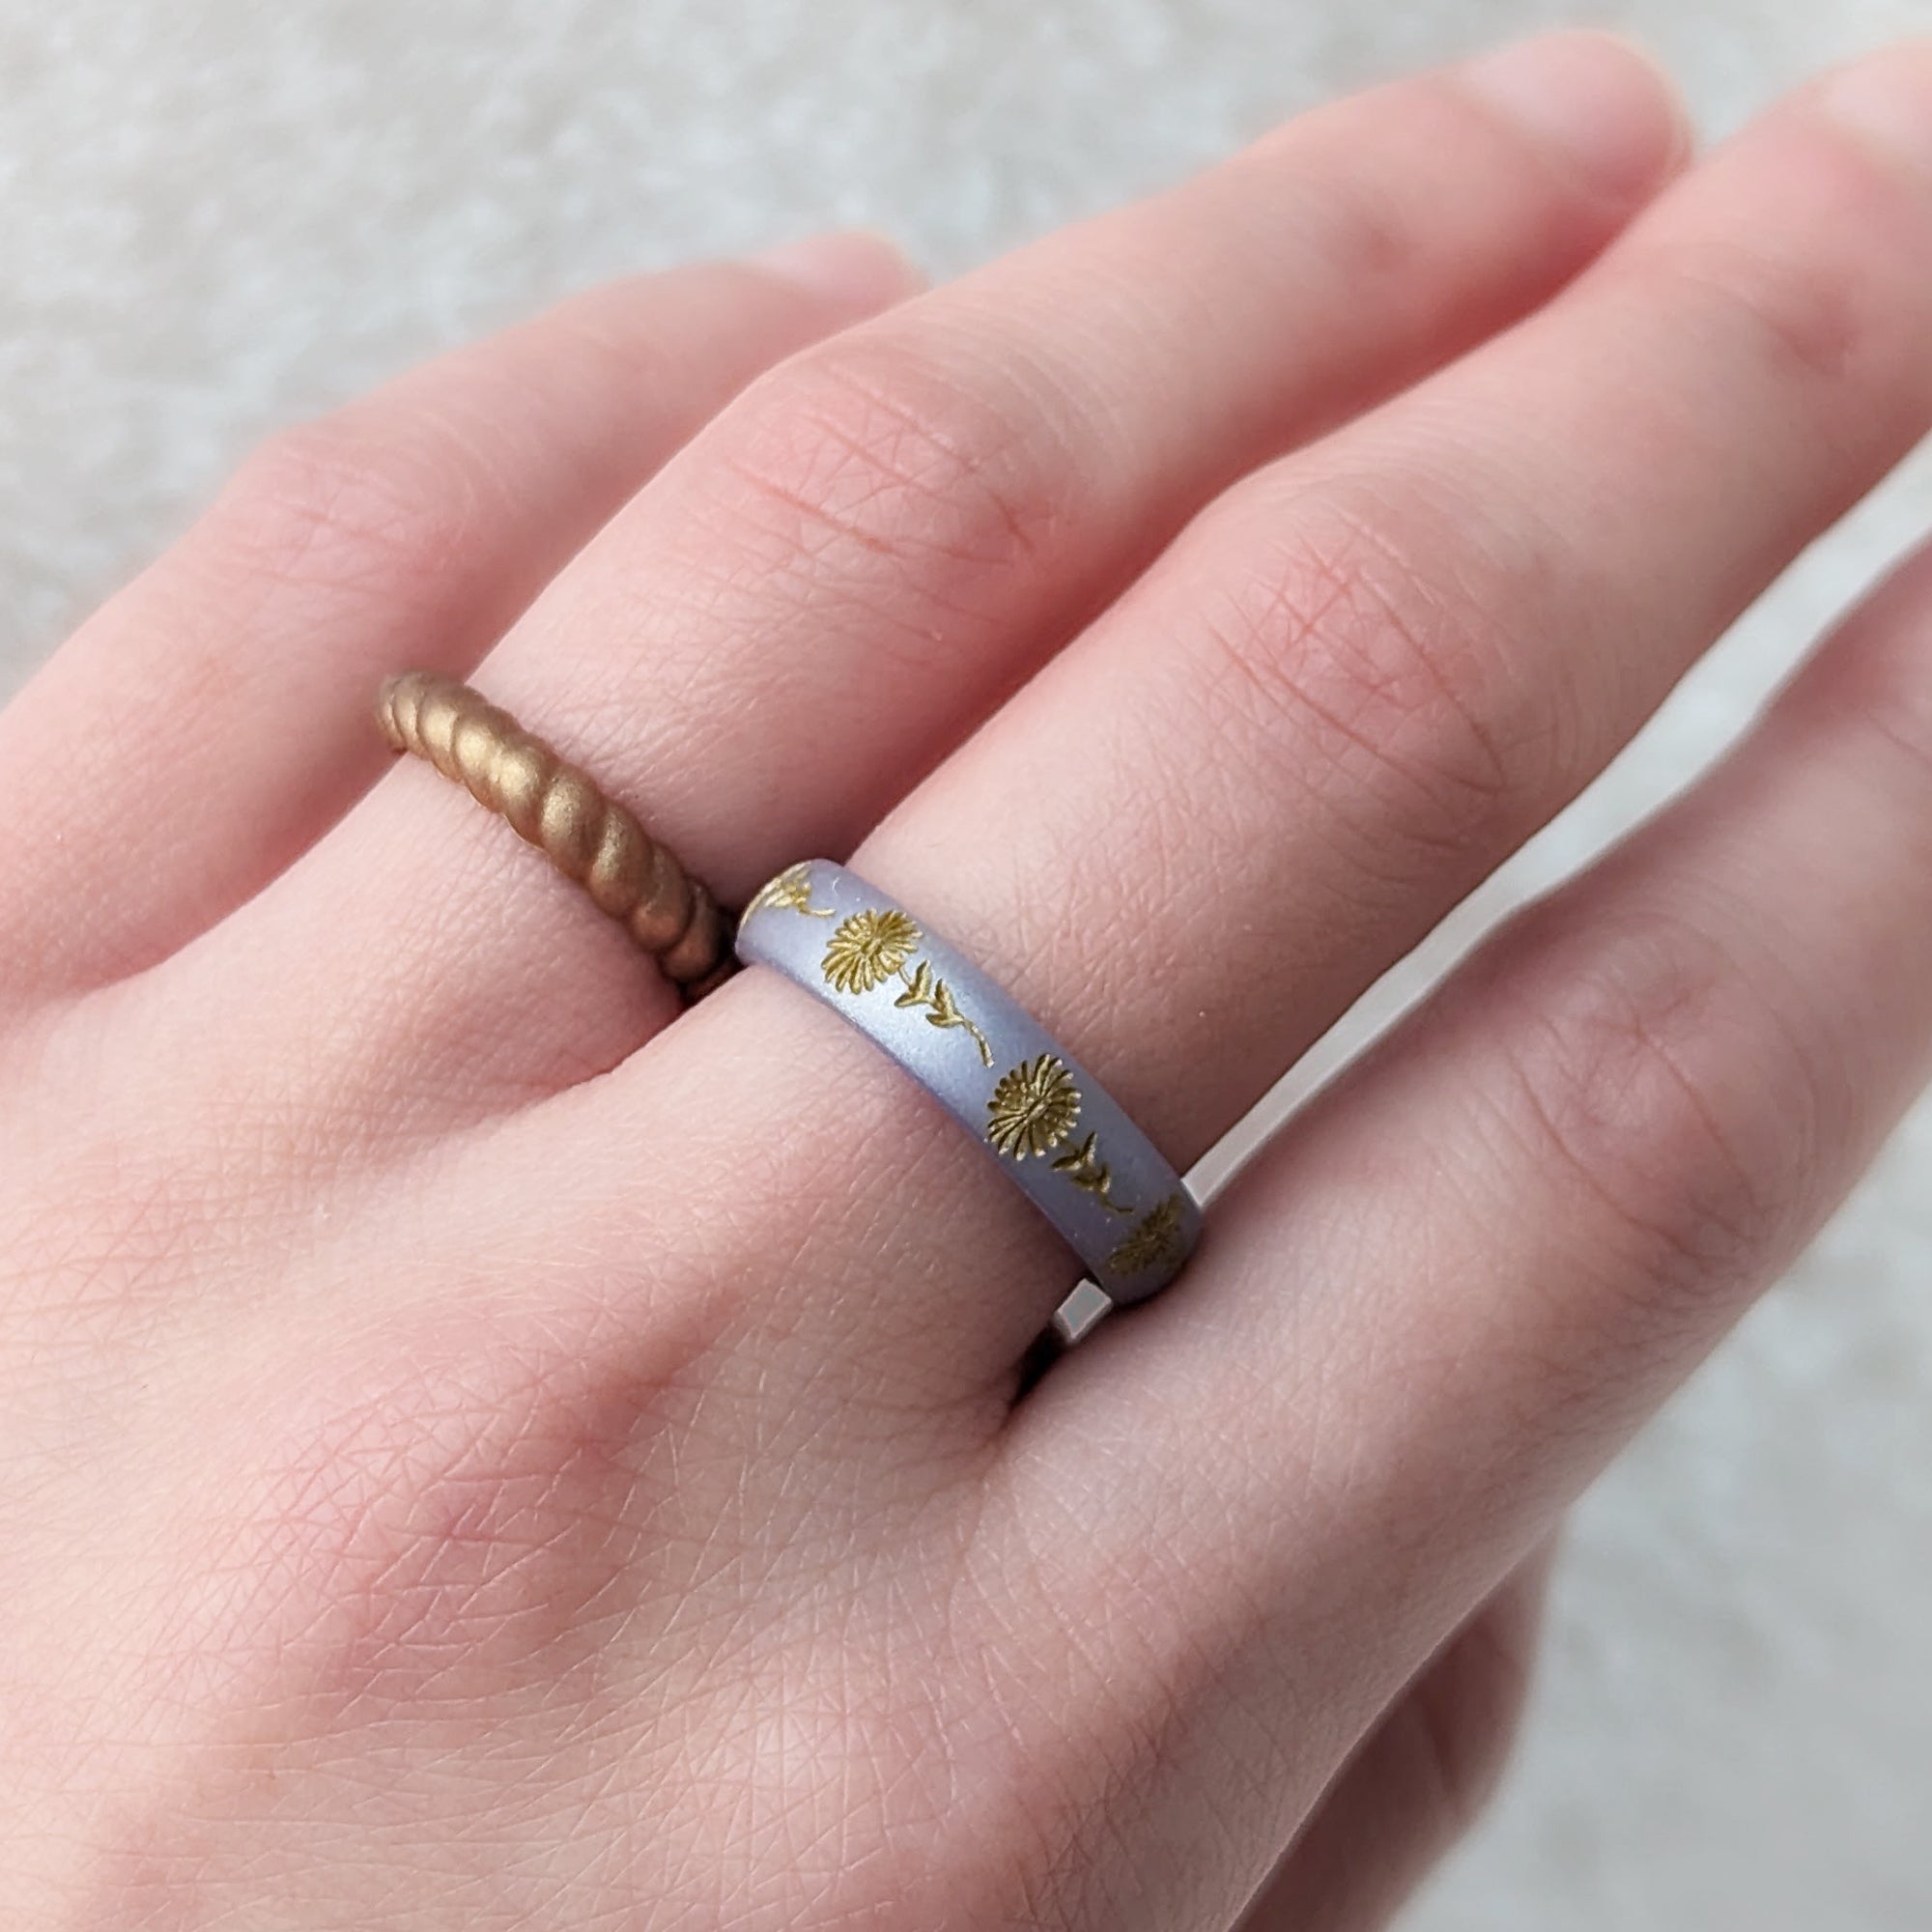 Daisy Silicone Ring, April Birth Flower, Engraved with Gold Inlay